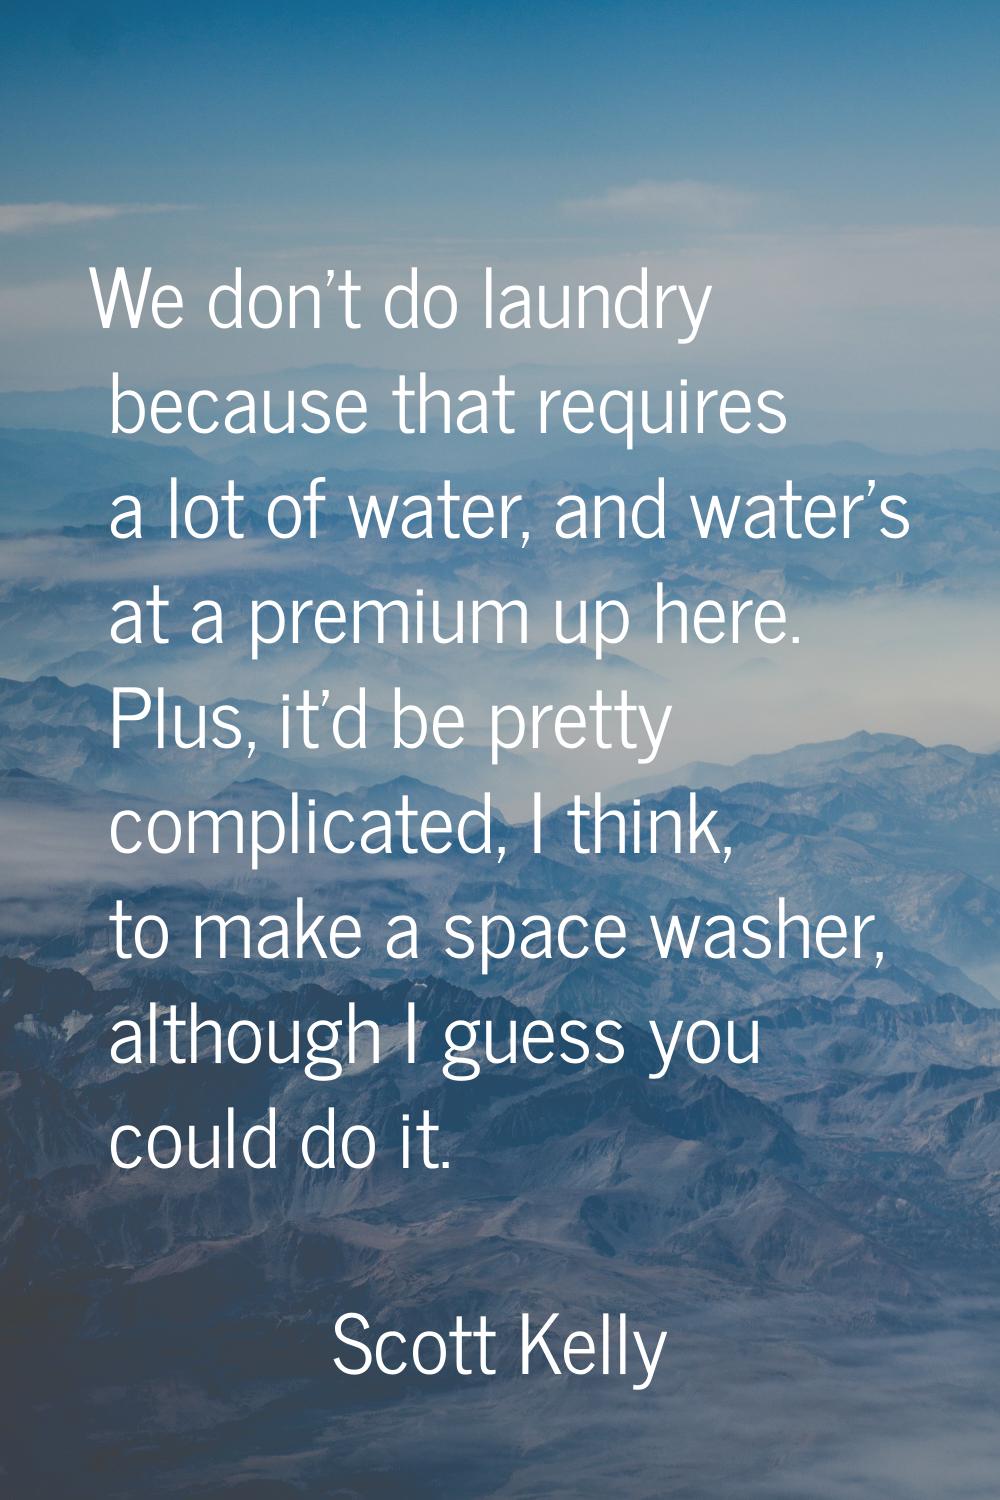 We don't do laundry because that requires a lot of water, and water's at a premium up here. Plus, i